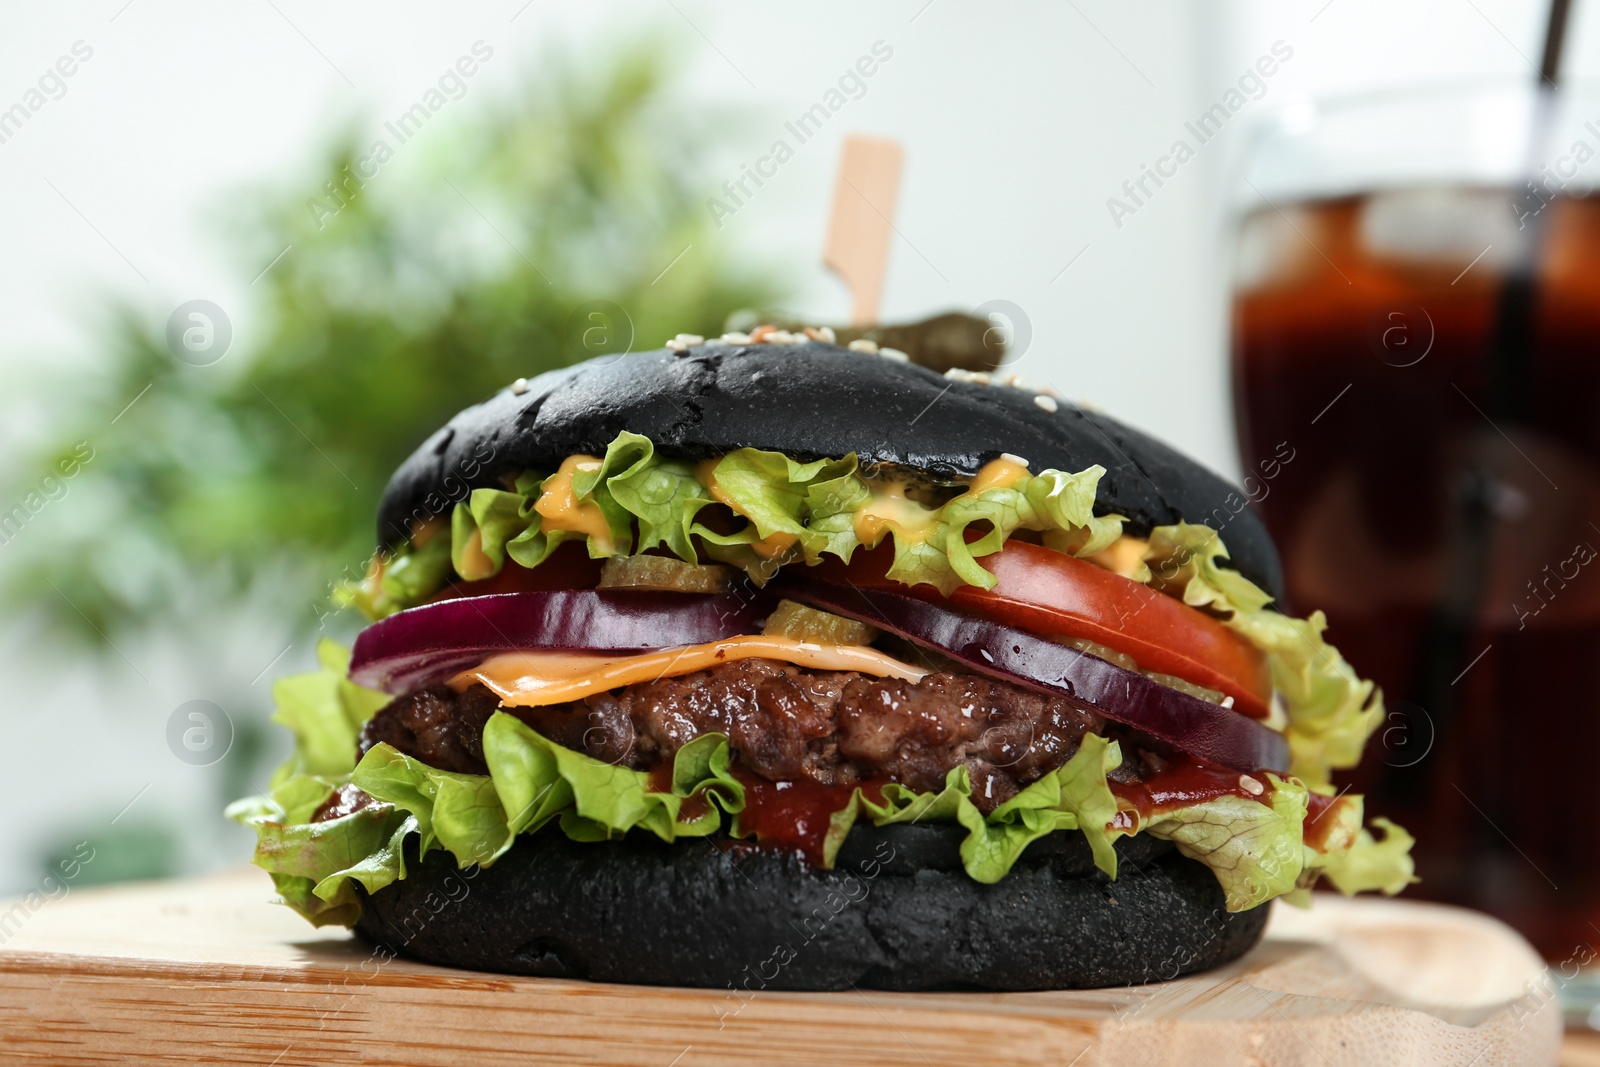 Photo of Board with juicy black burger, closeup view